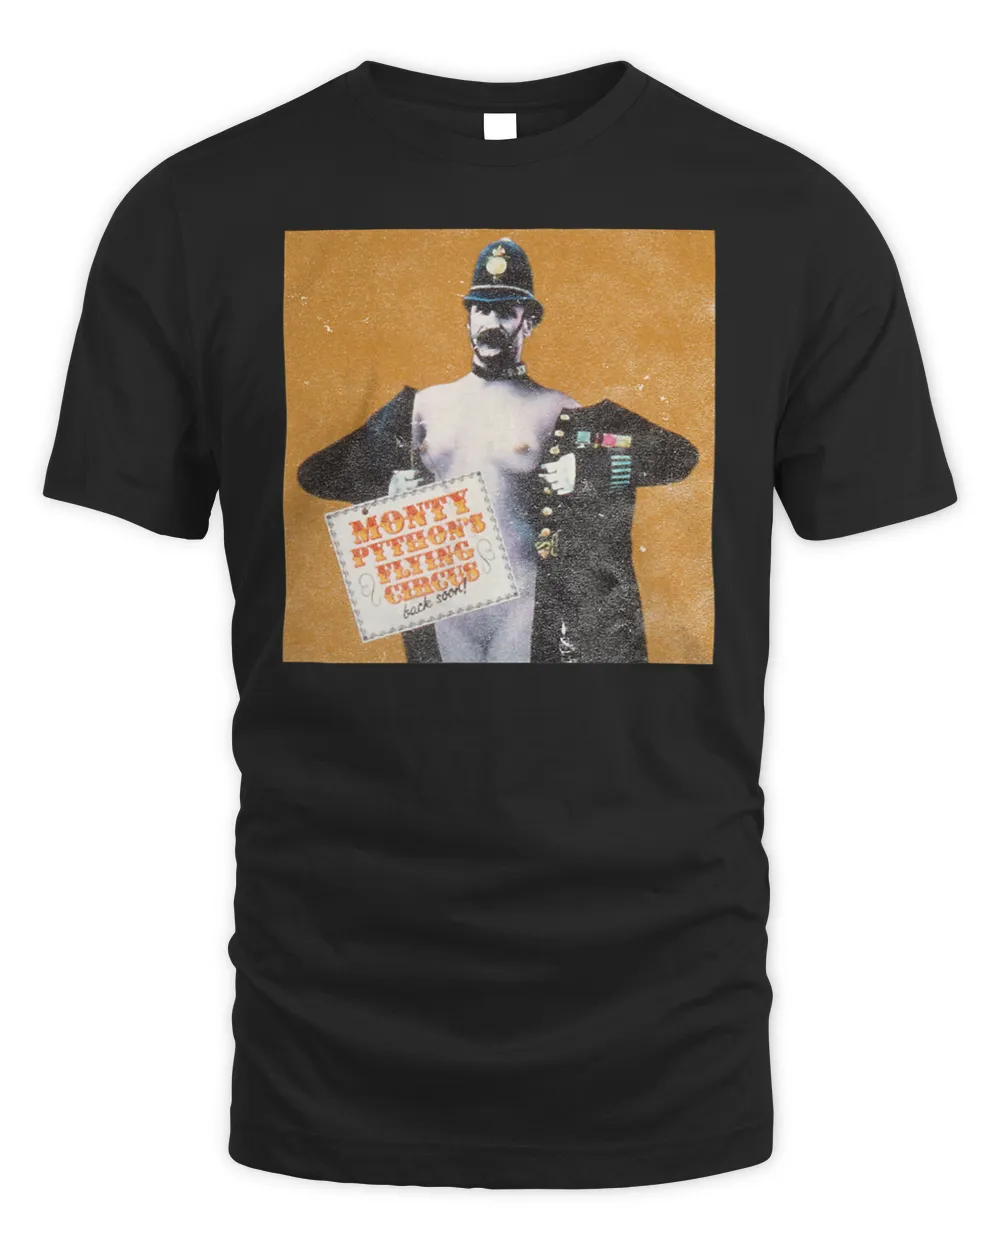 Monty Python Official Police Flying Circus T-Shirt